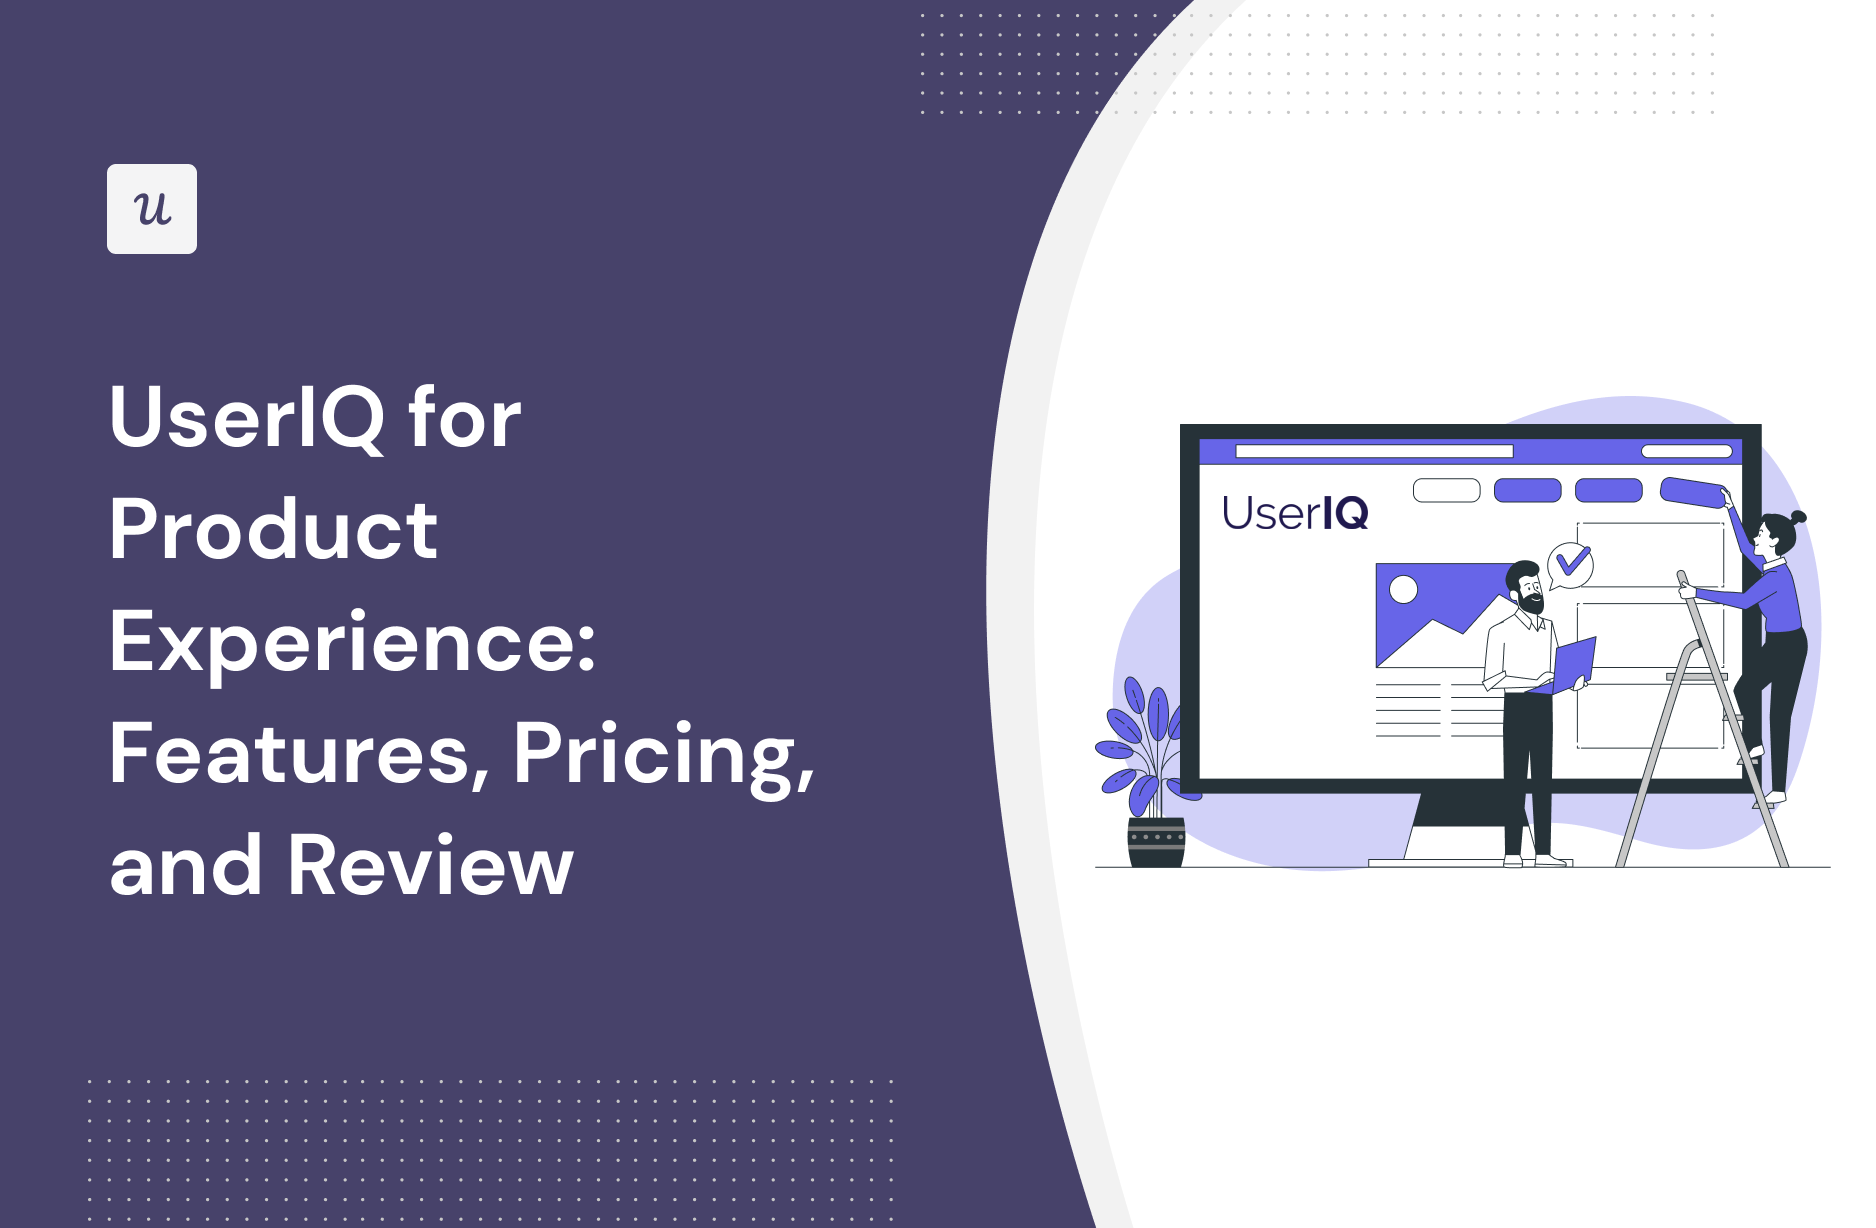 UserIQ for Product Experience: Features, Pricing, and Review